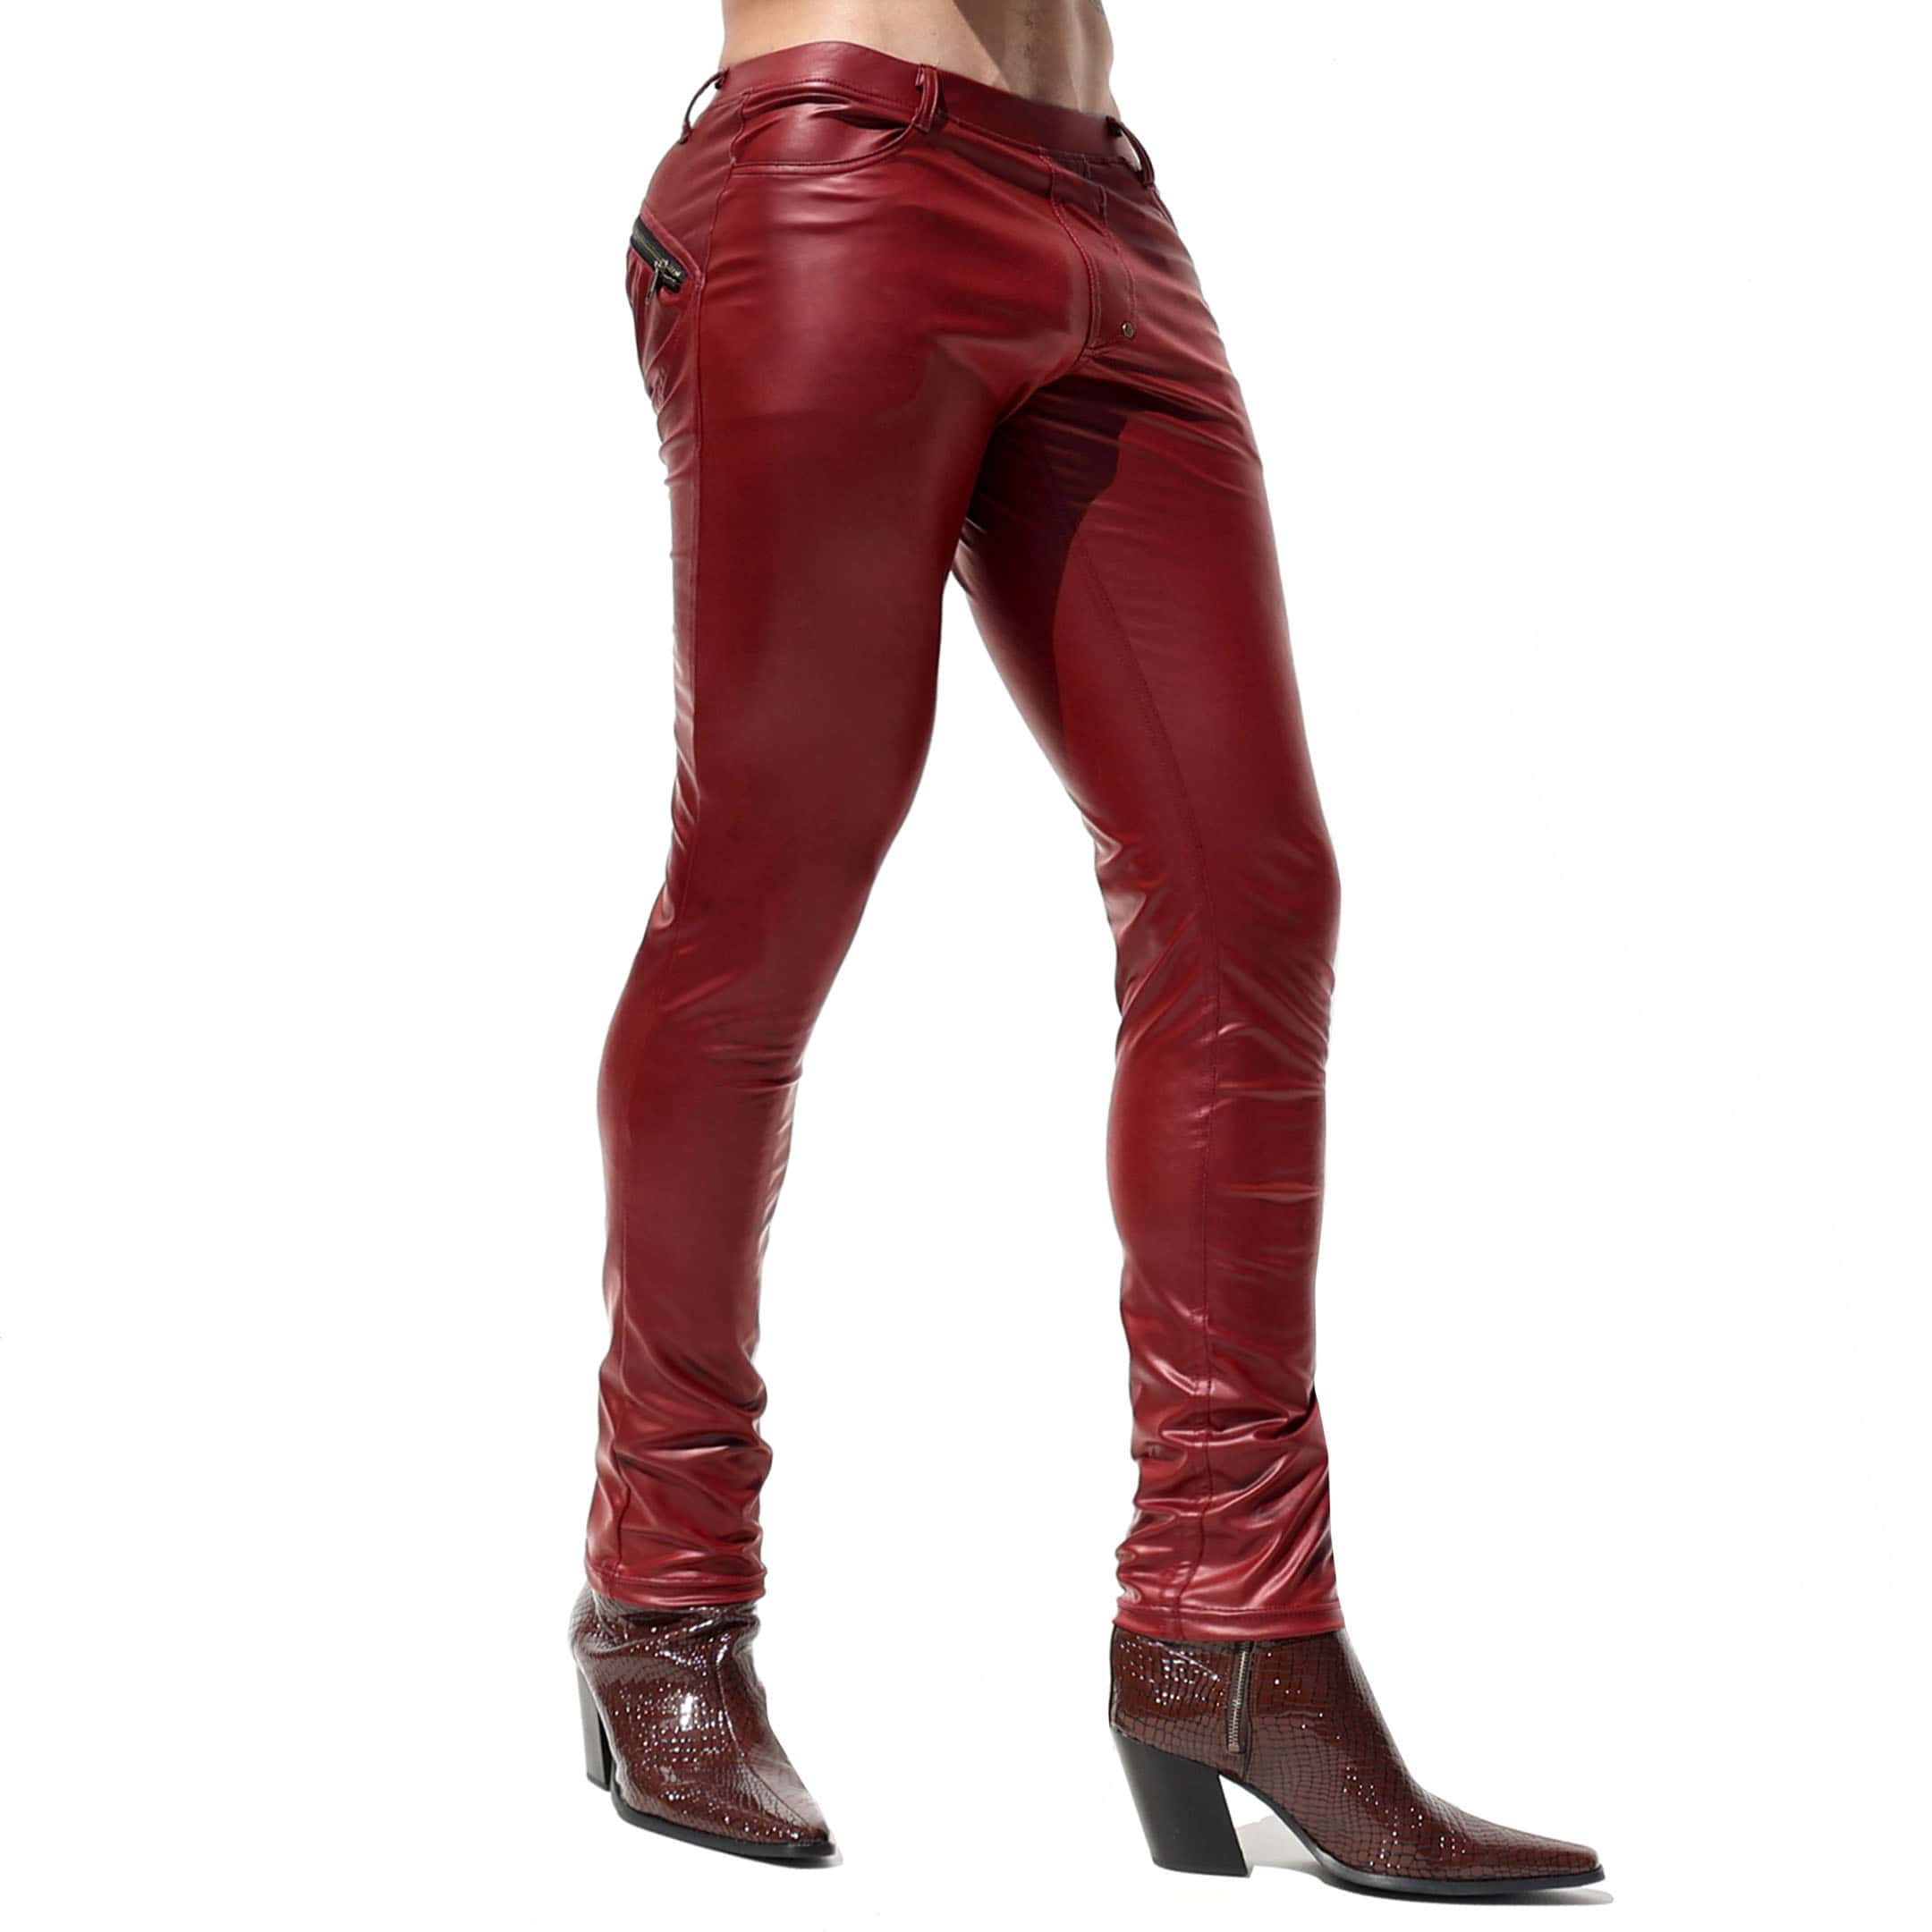 Shascullfites Pants Burgundy Skinny Leather Pants Pu Faux Leather Trousers  Womens Dark Red Leather Pants Womens